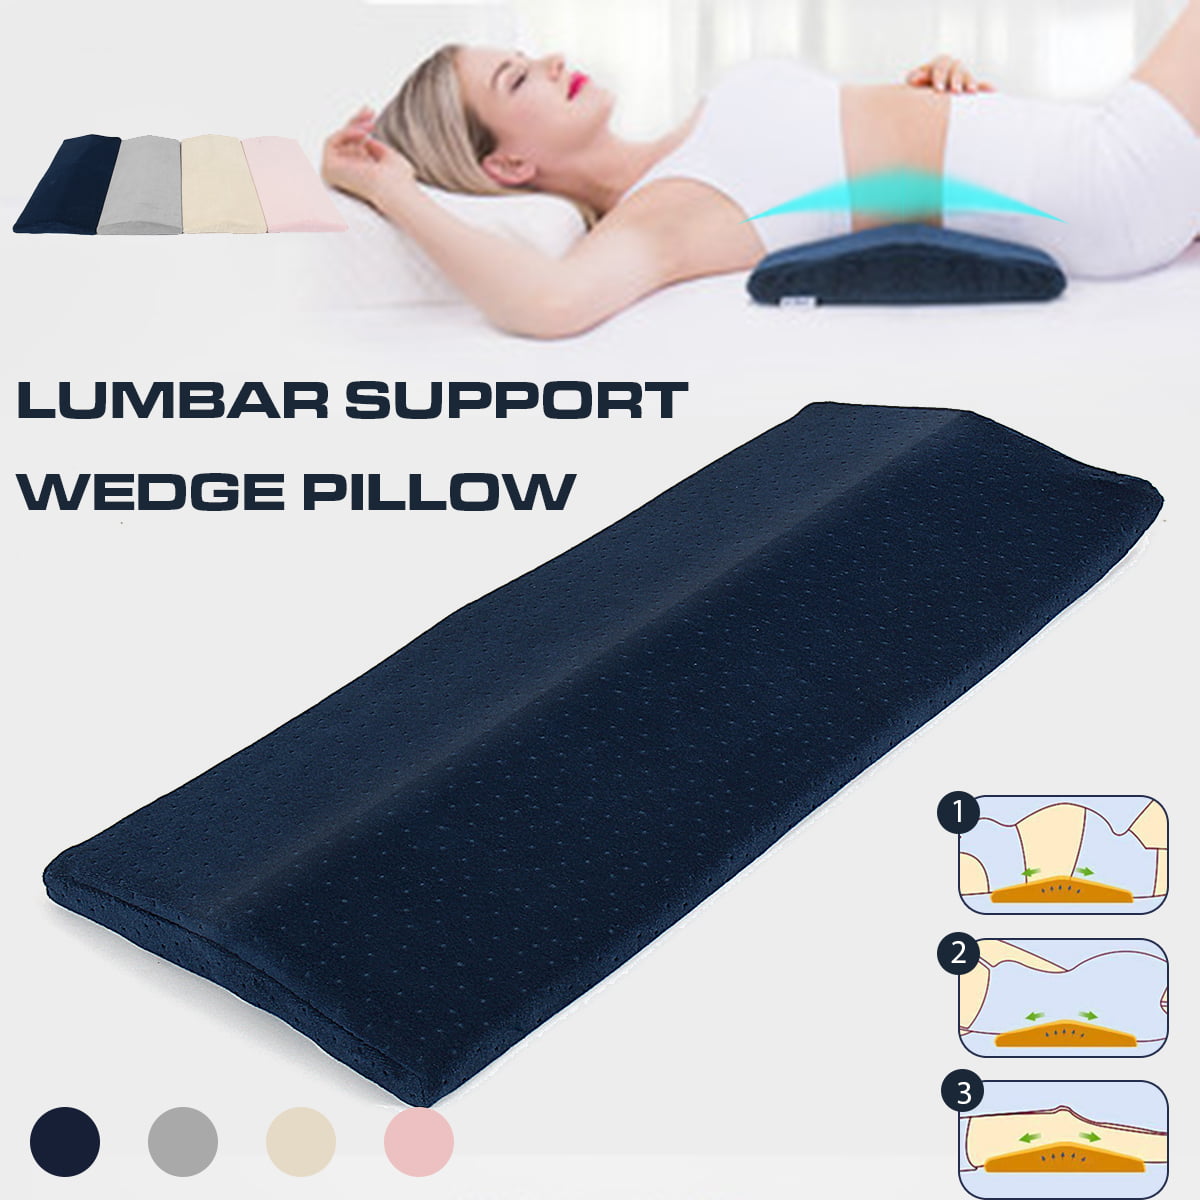 Pain Relief Lumbar Support Wedge Pillow Sleep Adjustable Bed Cushion Lower US 